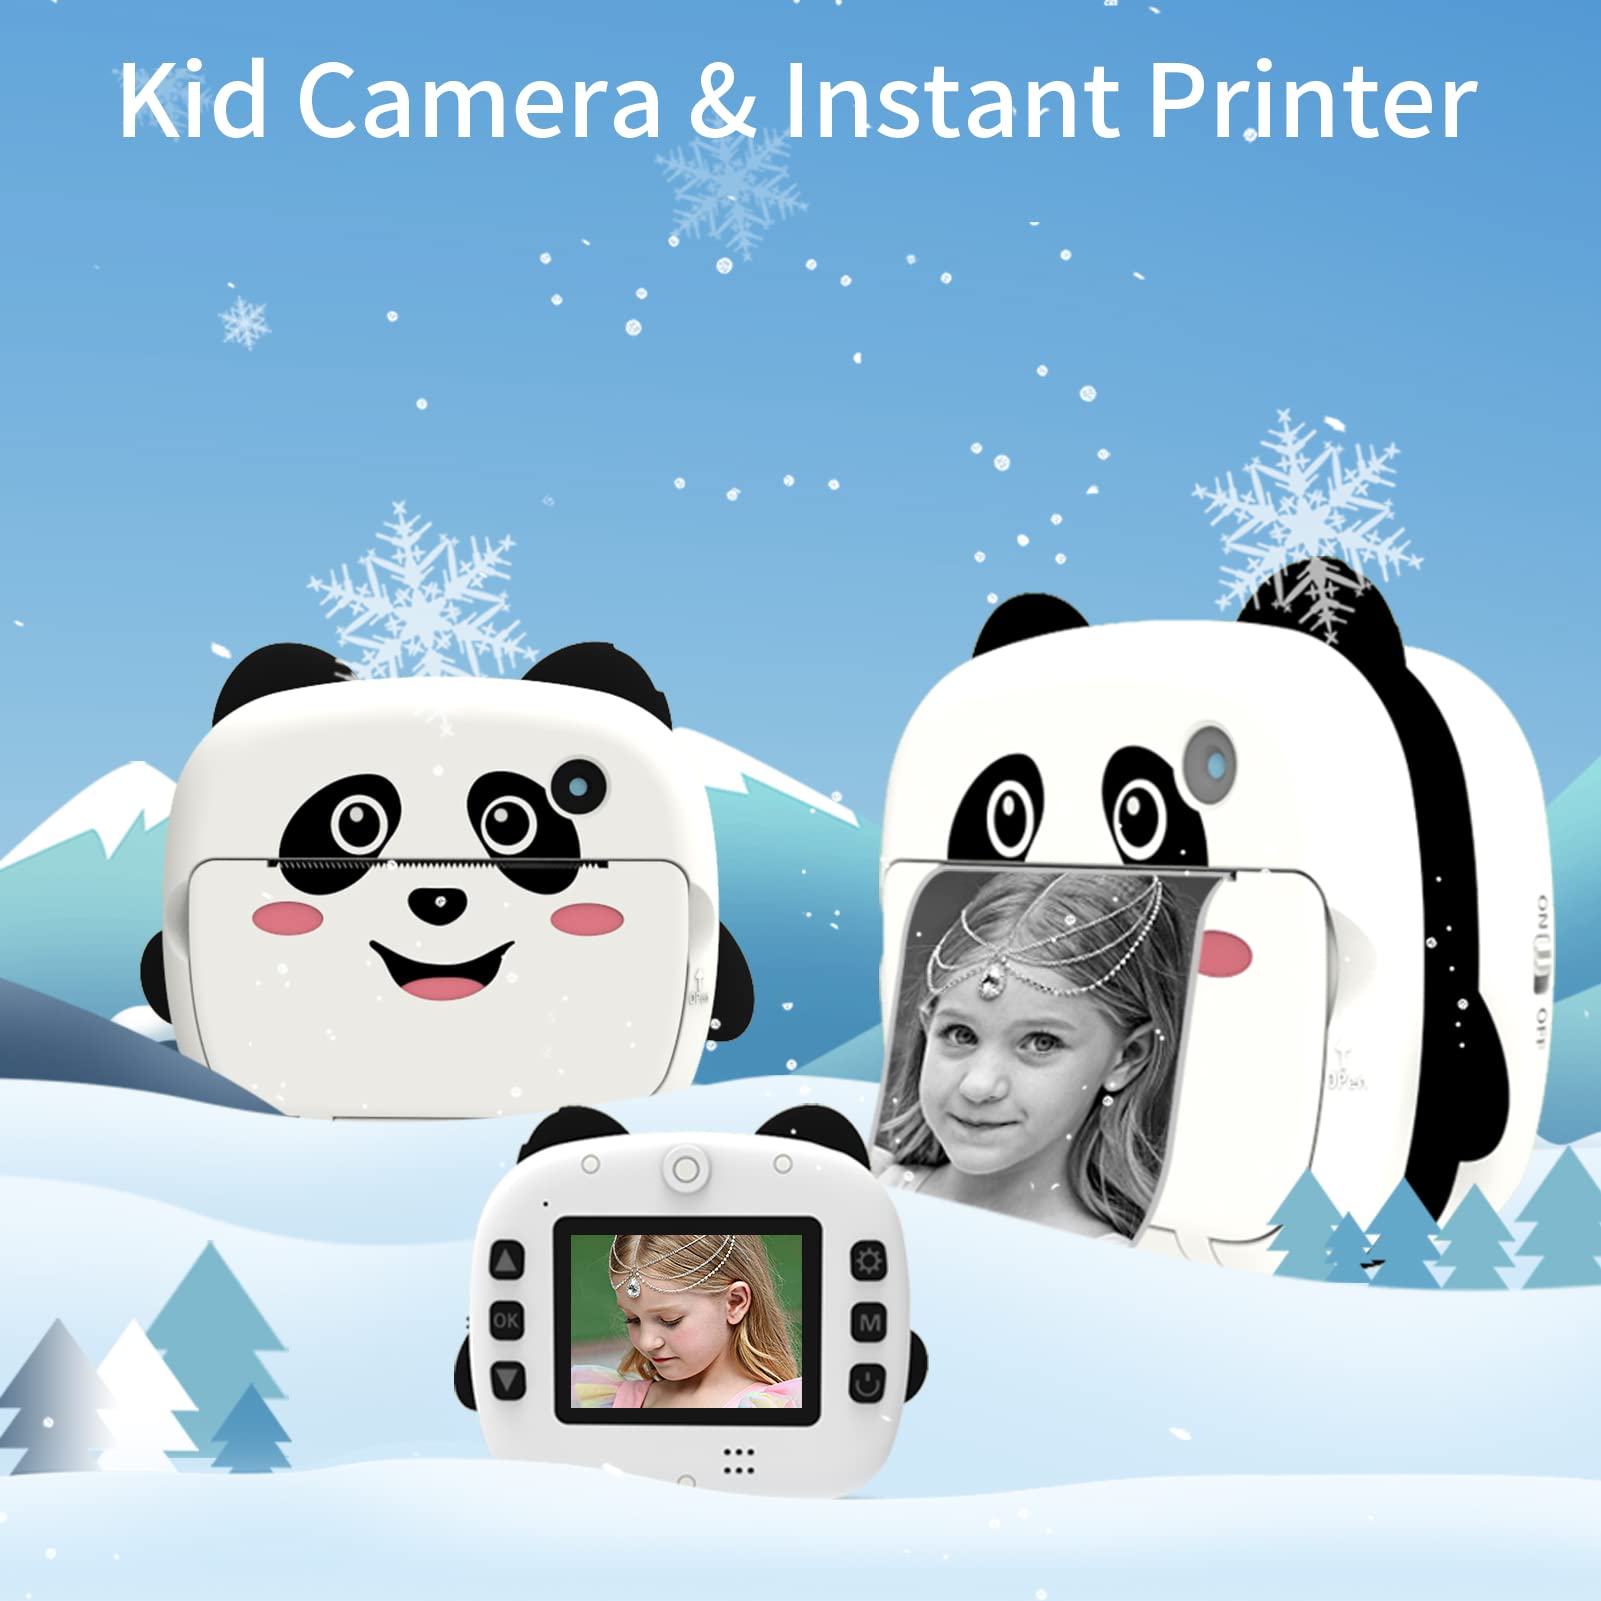 ADBEN Portable Children Instant Thermal Print Camera 2.4 Inch Screen 1080P Digital Camera Photo Selfie 1080P FHD Video Thermal Inkless Printing 3 Rolls White Print Paper Learning Toy Birthday Gift for